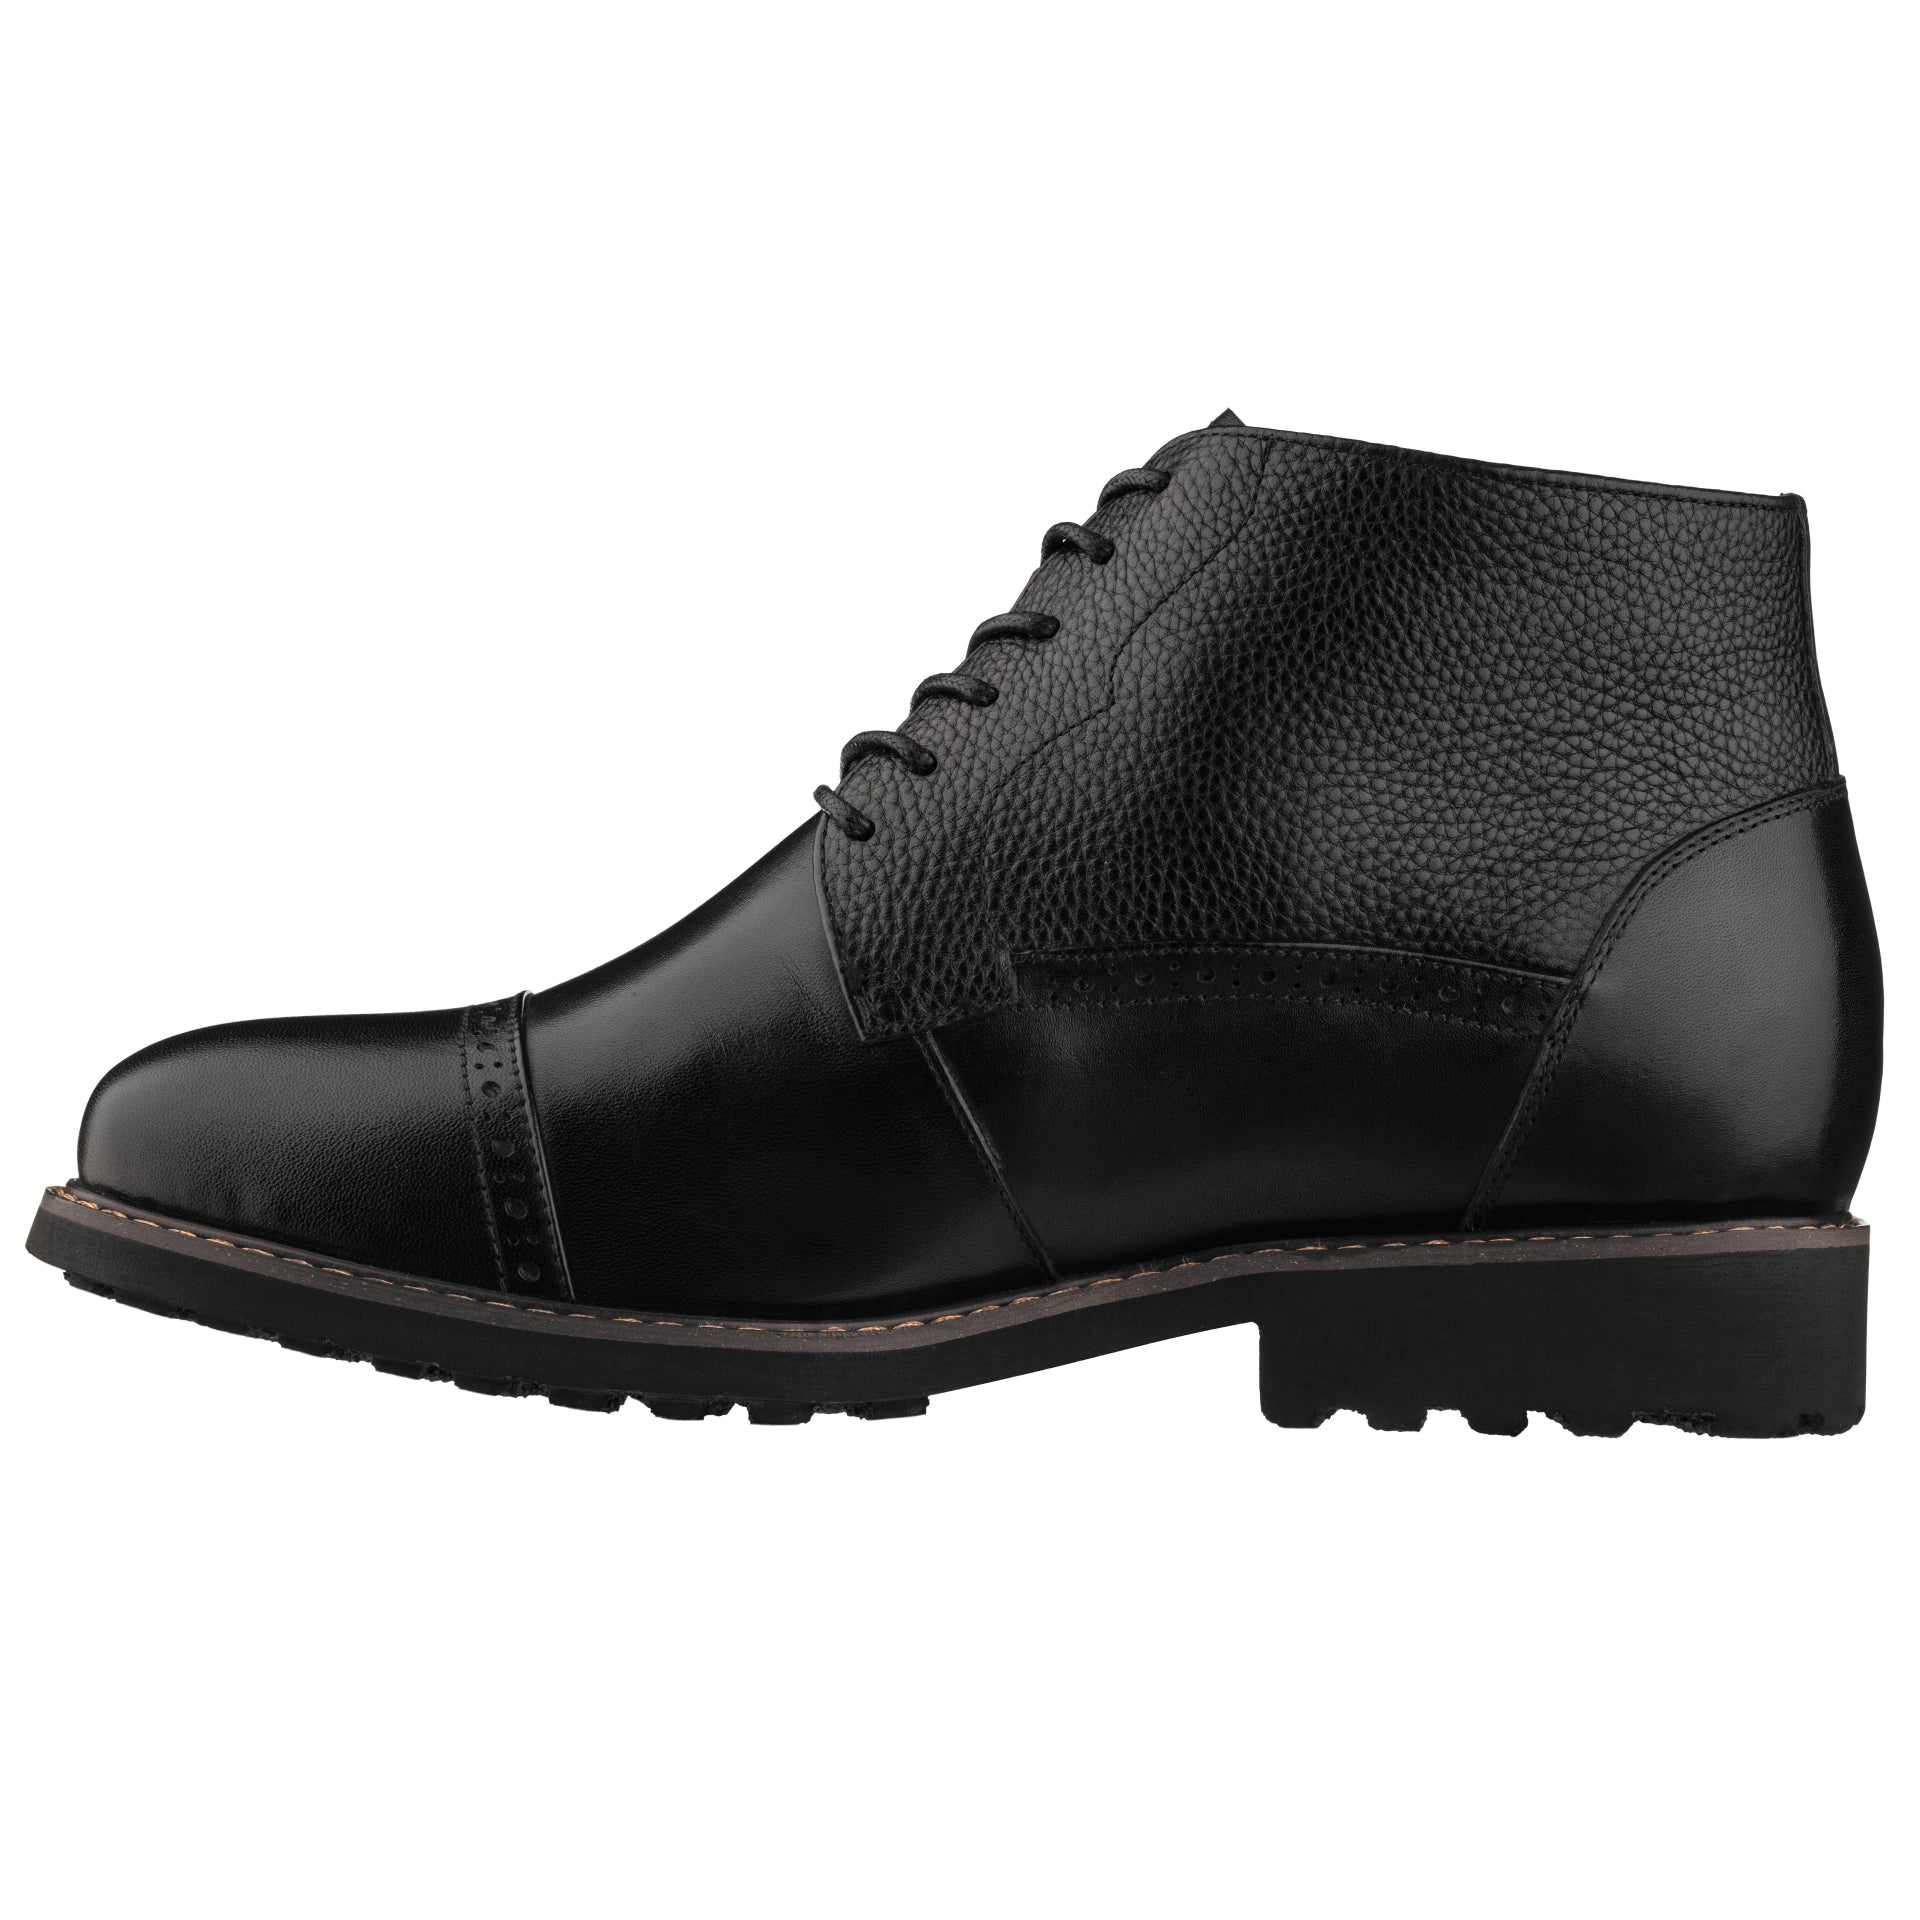 Elevator shoes height increase CALTO - Y41083 - 3.2 Inches Taller (Black) - Lace Up Casual Boots